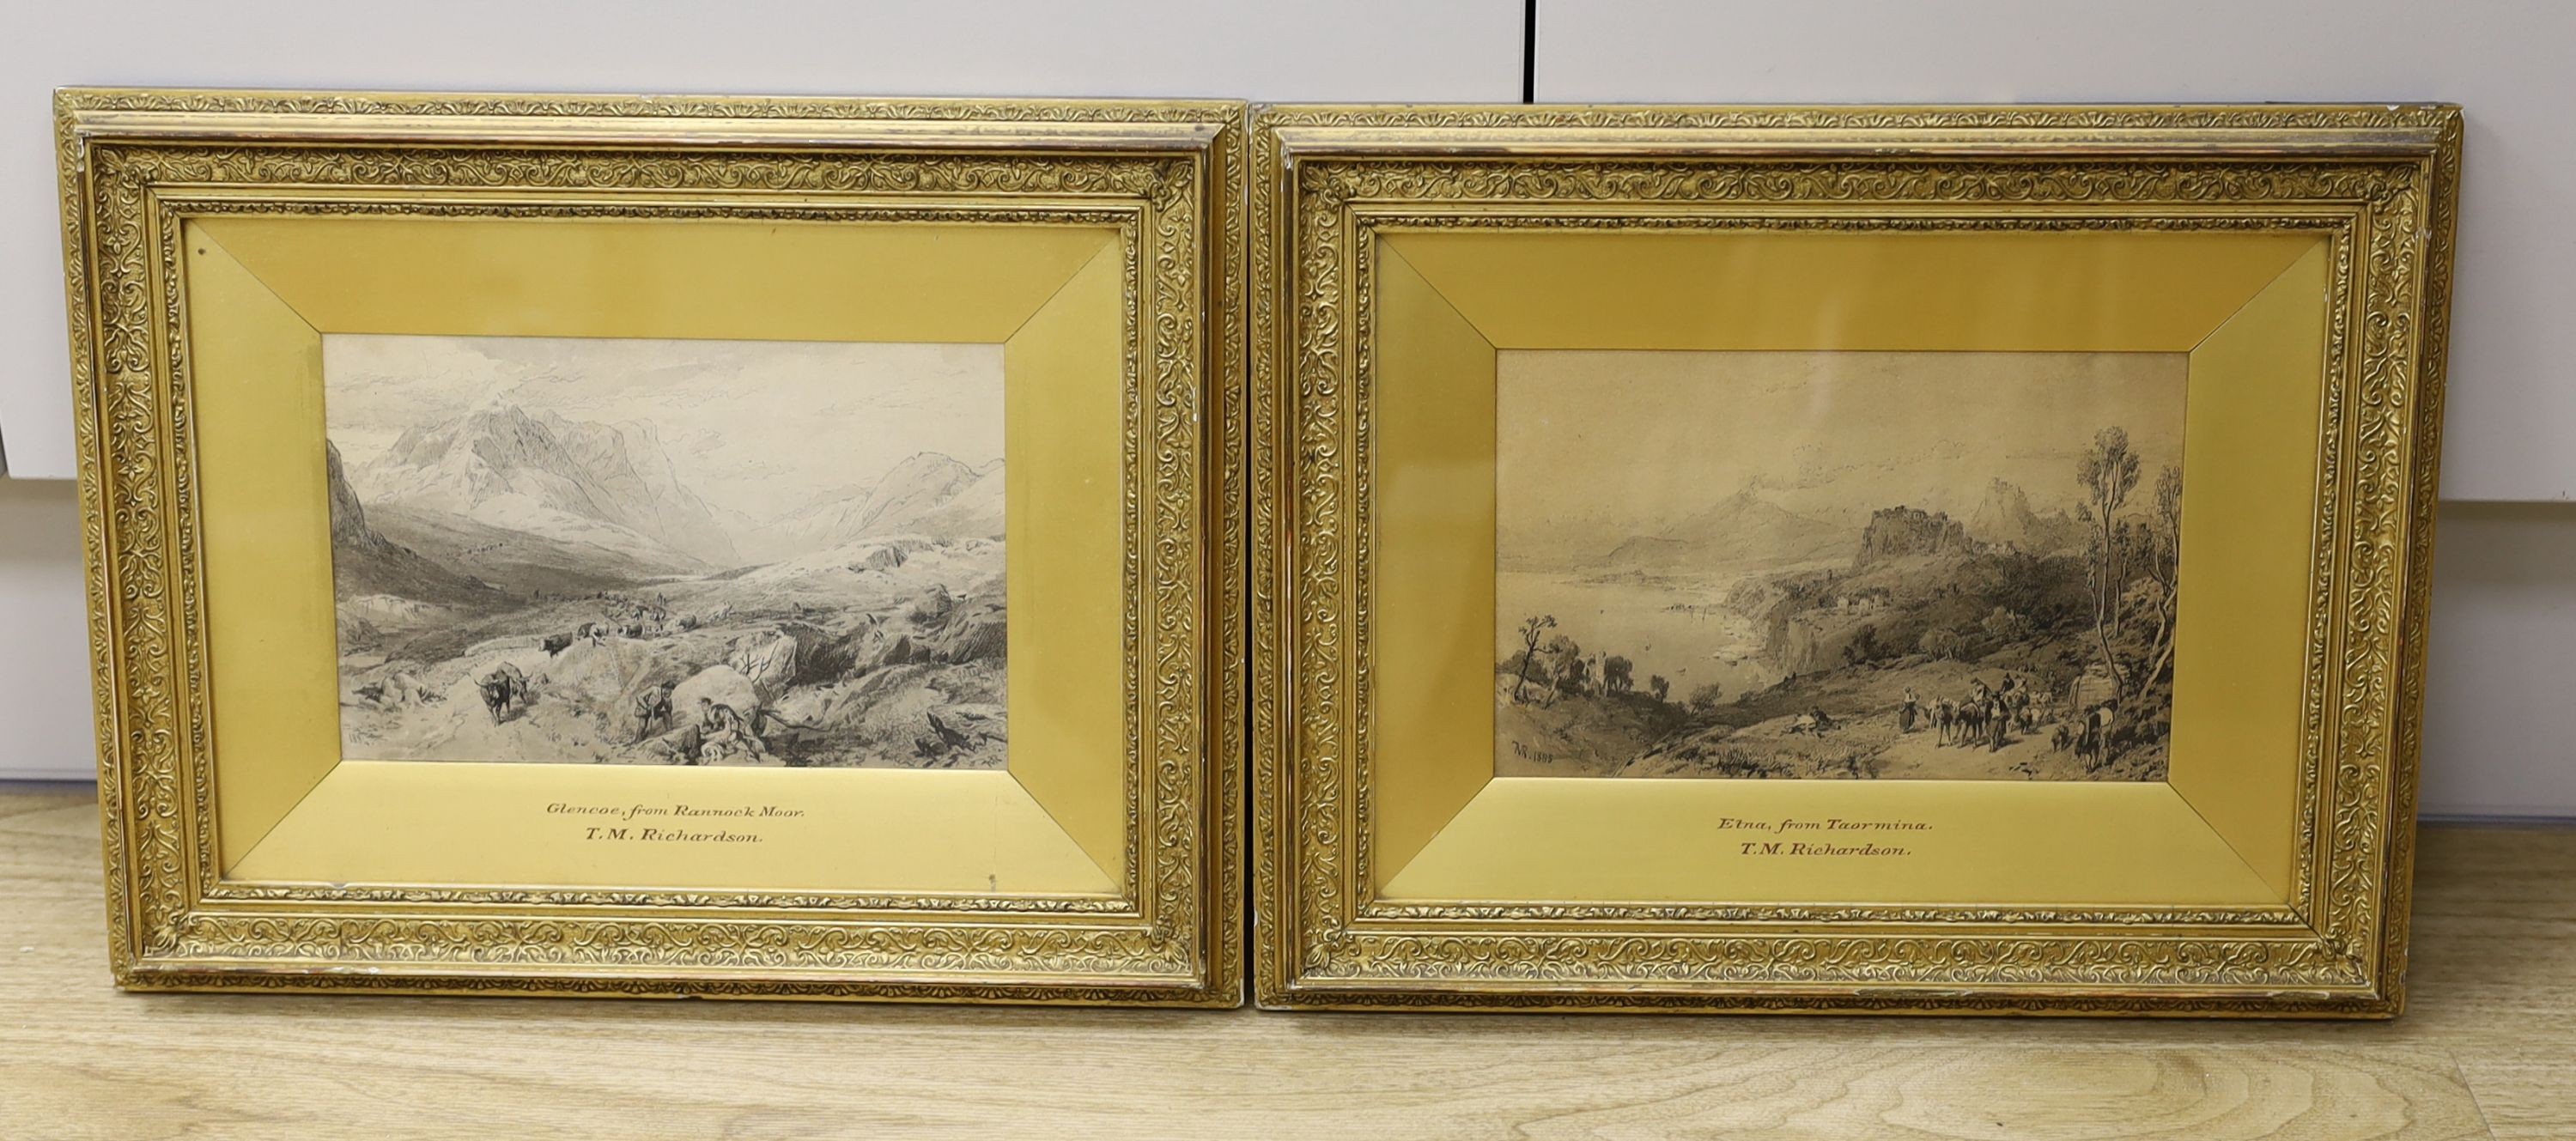 Thomas Miles Richardson (1813-1890), pair of ink and wash drawings, 'Etna from Taormina' and 'Glencoe from Ranoch Moor', initialled and dated 1884/85, 14 x 21cm